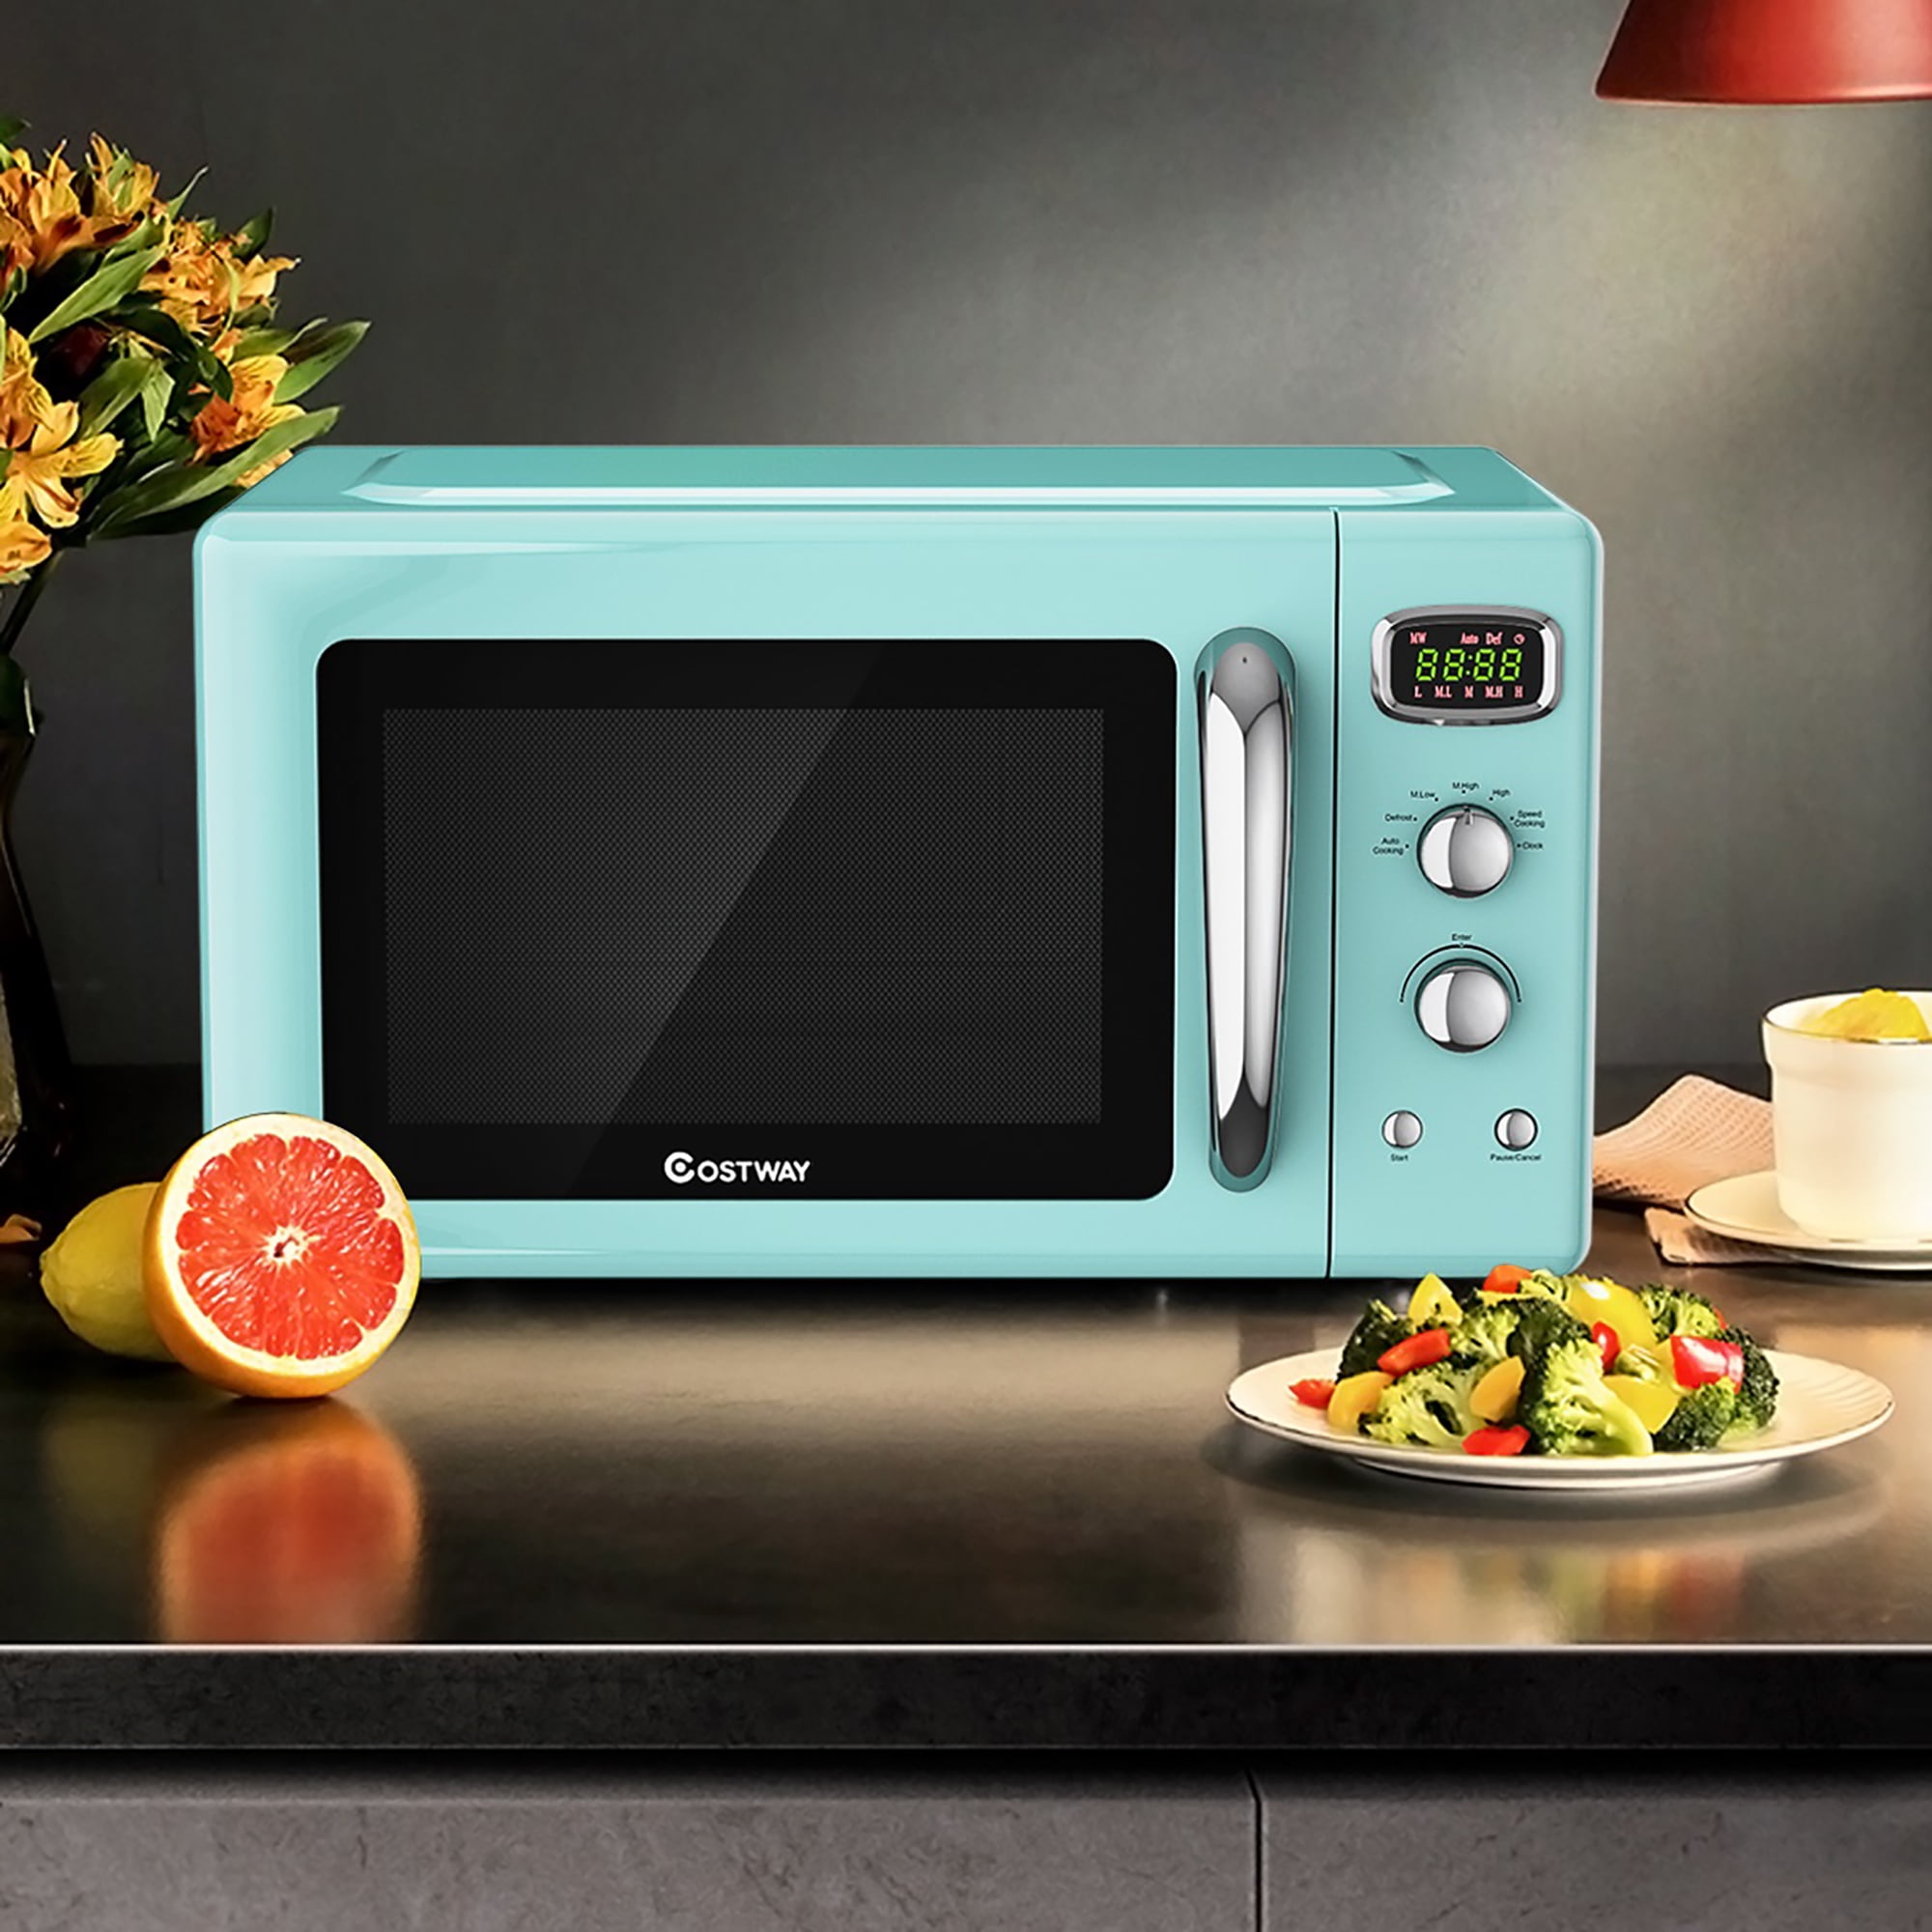 Details about   Retro Countertop Microwave Oven Kitchen Appliance Home Decor .09 Cu Ft Teal New 